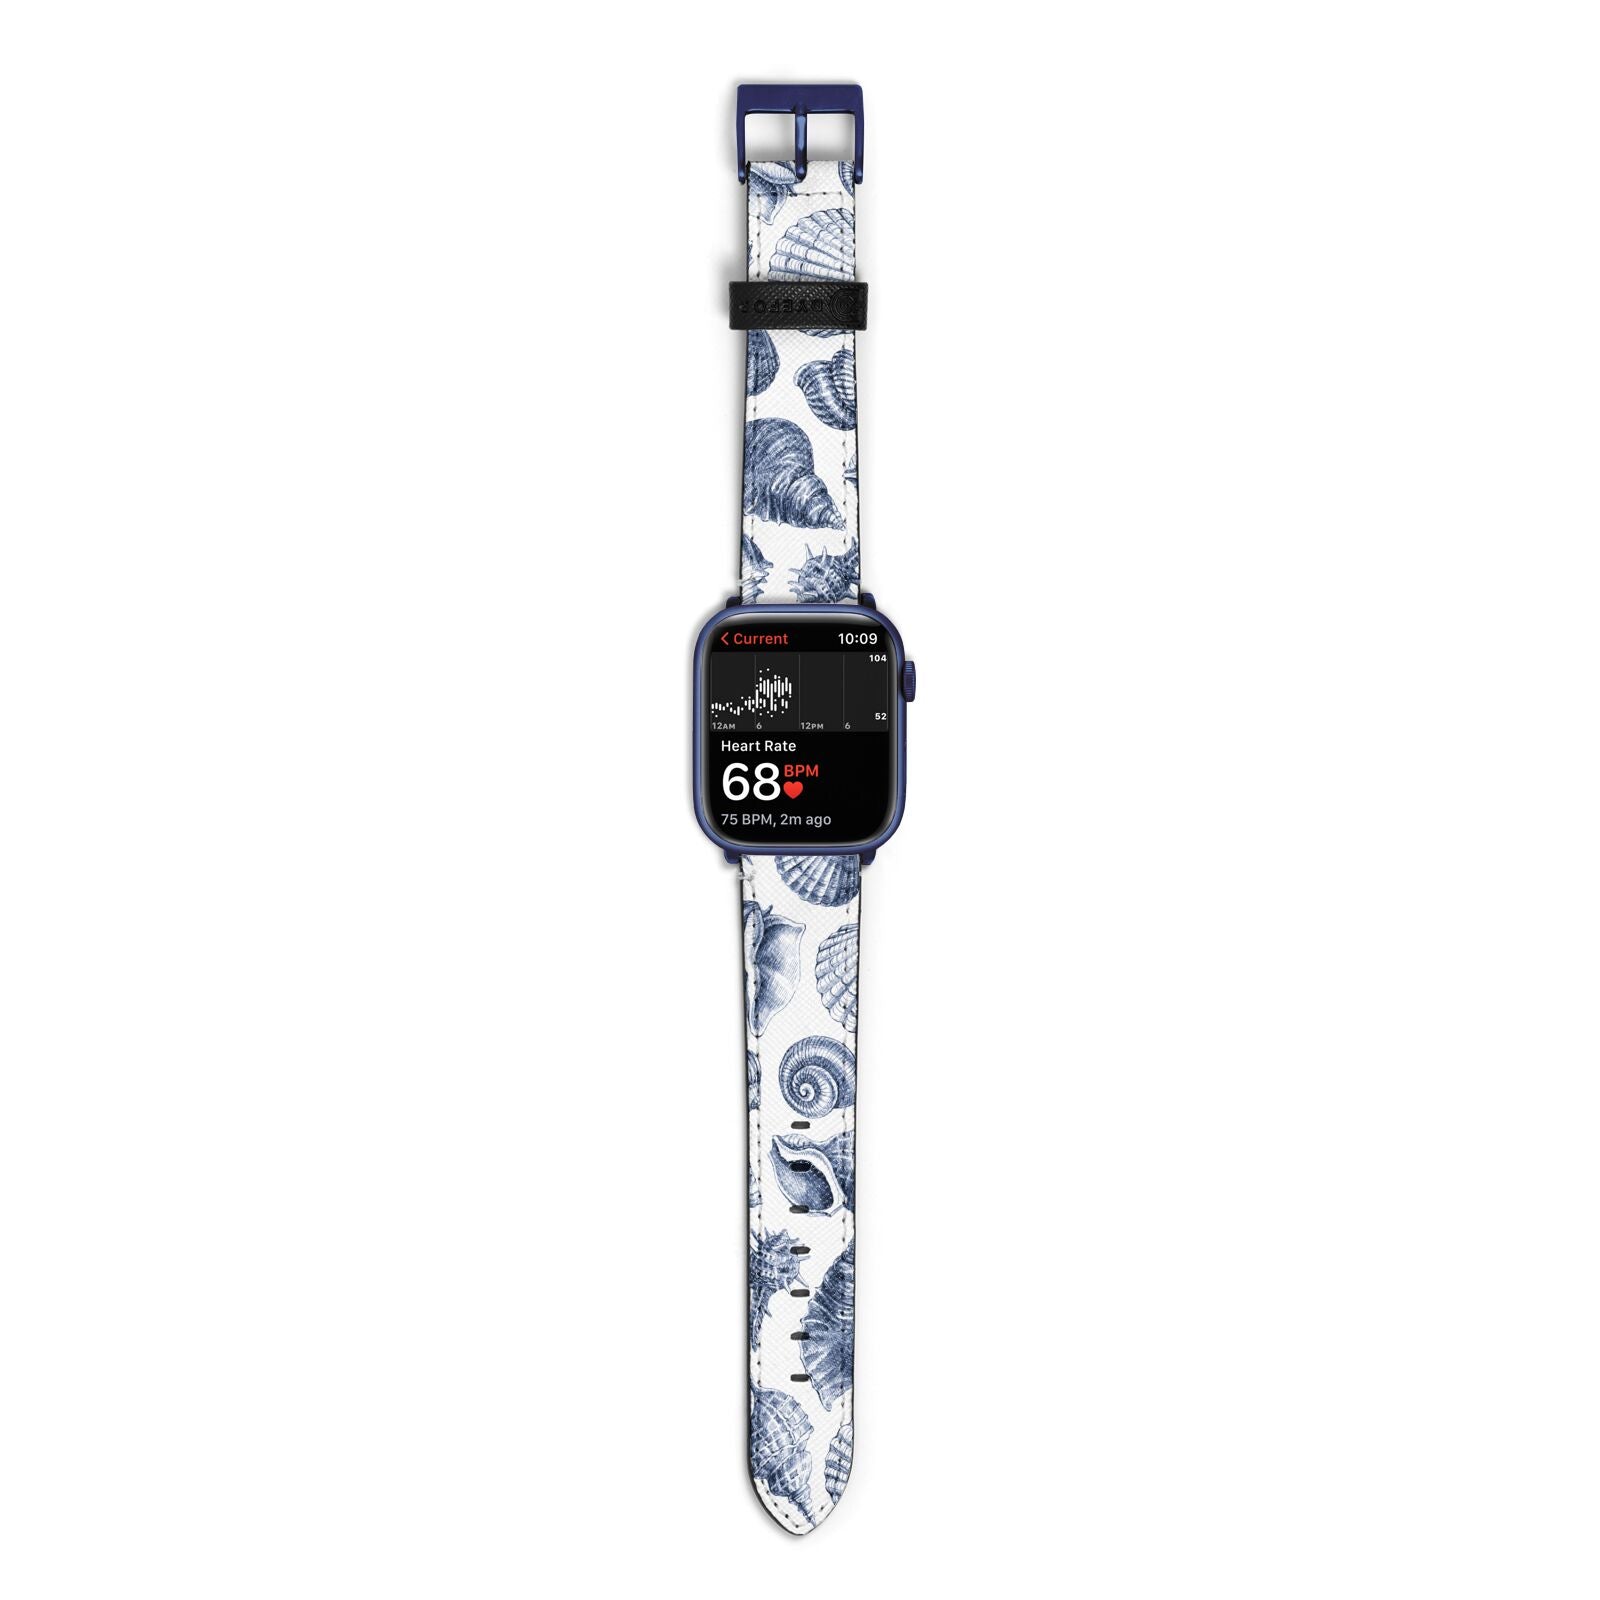 Shell Apple Watch Strap Size 38mm with Blue Hardware